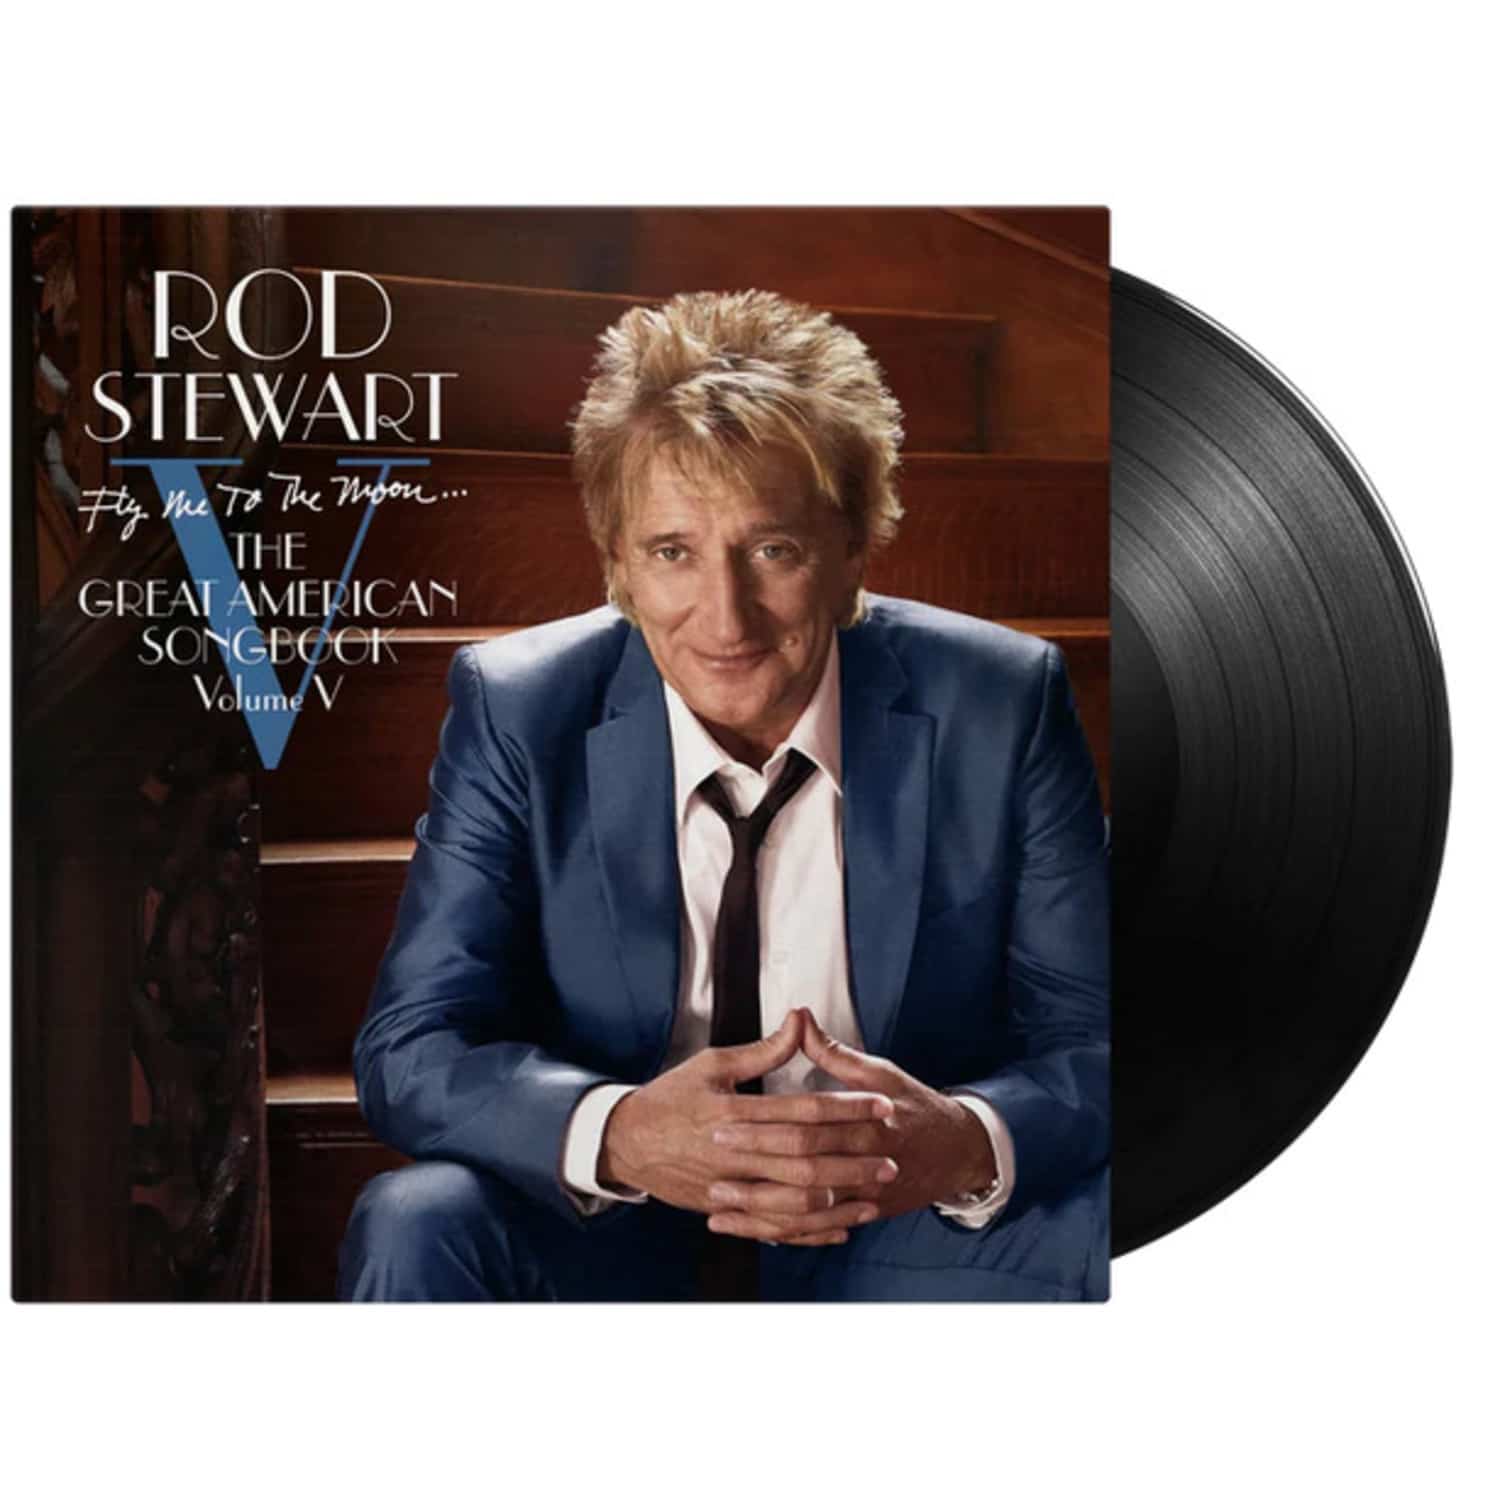 Rod Stewart - FLY ME TO THE MOON...THE GREAT AMERICAN SONGBOOK V 